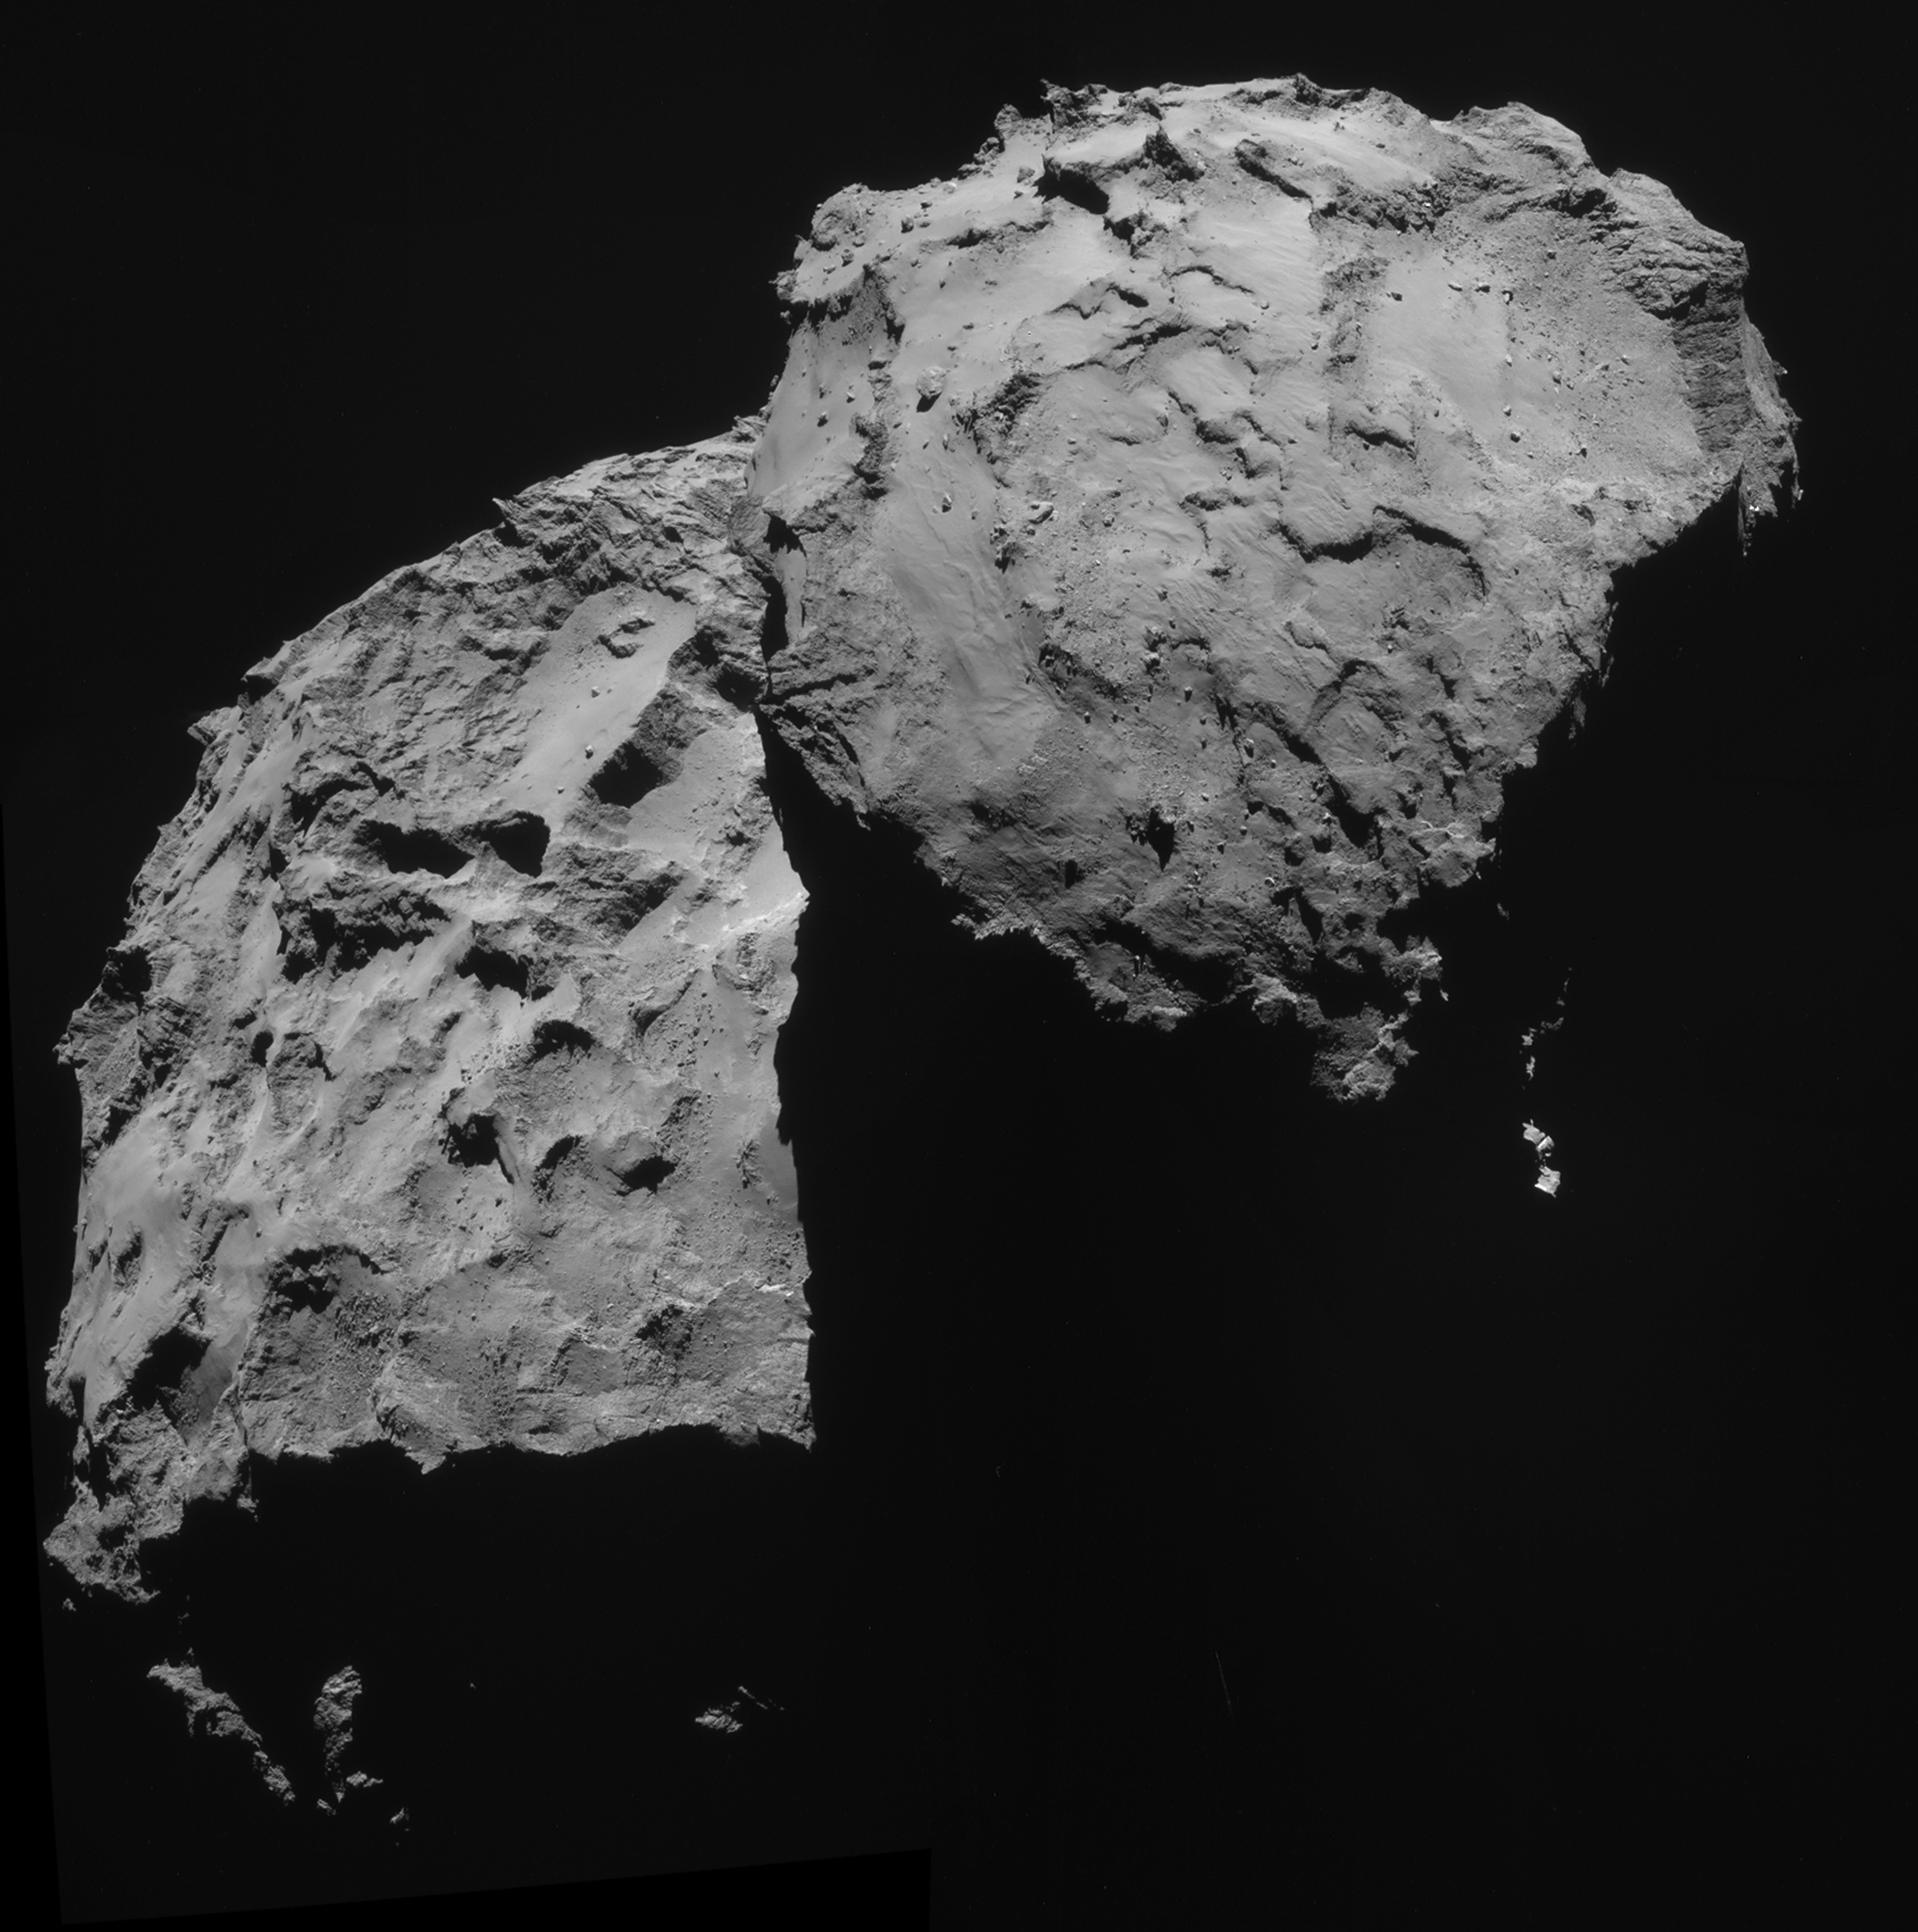 Comet 67P Churyumov Gerasimenko is a relative newcomer to the inner solar system, possibly originating from the Oort Cloud. Image: ESA